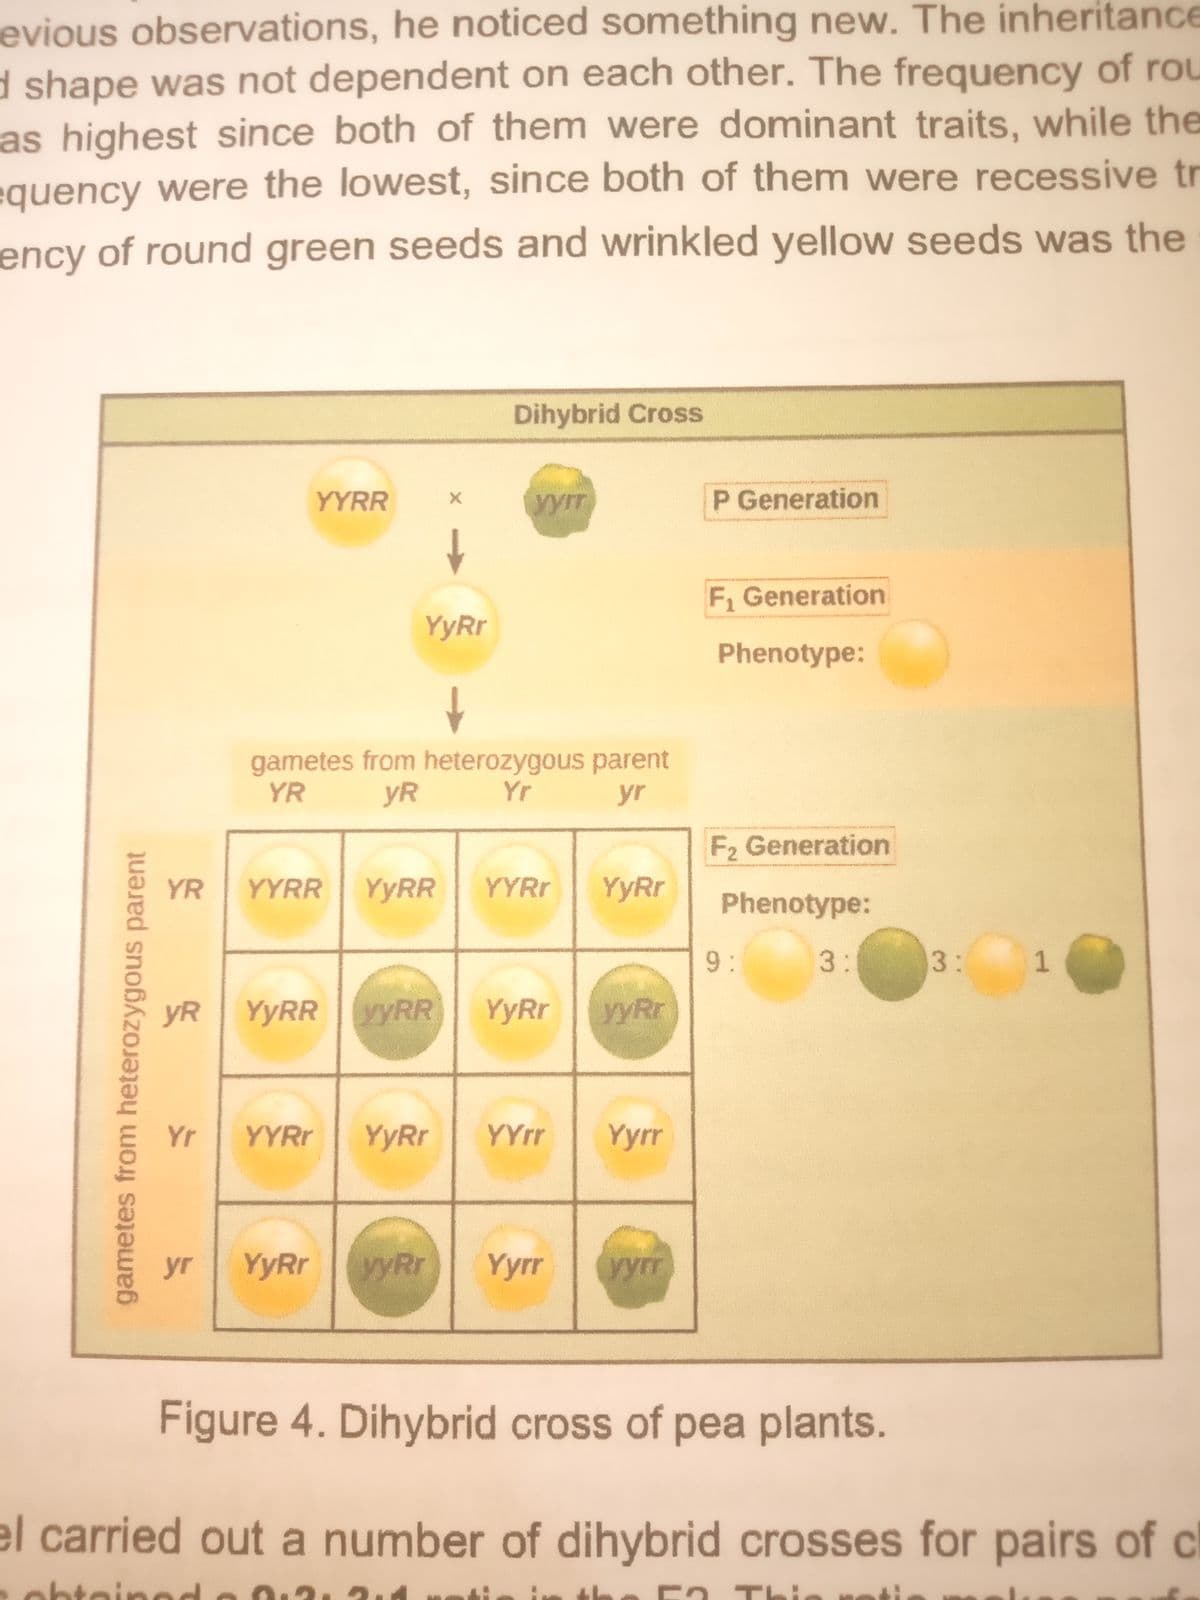 evious observations, he noticed something new. The inheritance
d shape was not dependent on each other. The frequency of rou
as highest since both of them were dominant traits, while the
equency were the lowest, since both of them were recessive tr
ency of round green seeds and wrinkled yellow seeds was the
Dihybrid Cross
YYRR
P Generation
F Generation
YyRr
Phenotype:
gametes from heterozygous parent
YR
yR
Yr
yr
F2 Generation
YR
YYRR
YYRR
YYRR
YyRr
Phenotype:
9:
3:
3:
yR
YYRR yRR
YyRr
yyRr
Yr
YYRR
YyRr
YYrr
Yyrr
yr
YyRr
yyRr
Yyrr
yyrr
Figure 4. Dihybrid cross of pea plants.
el carried out a number of dihybrid crosses for pairs of c
- TH
gametes from heterozygous parent
1.
